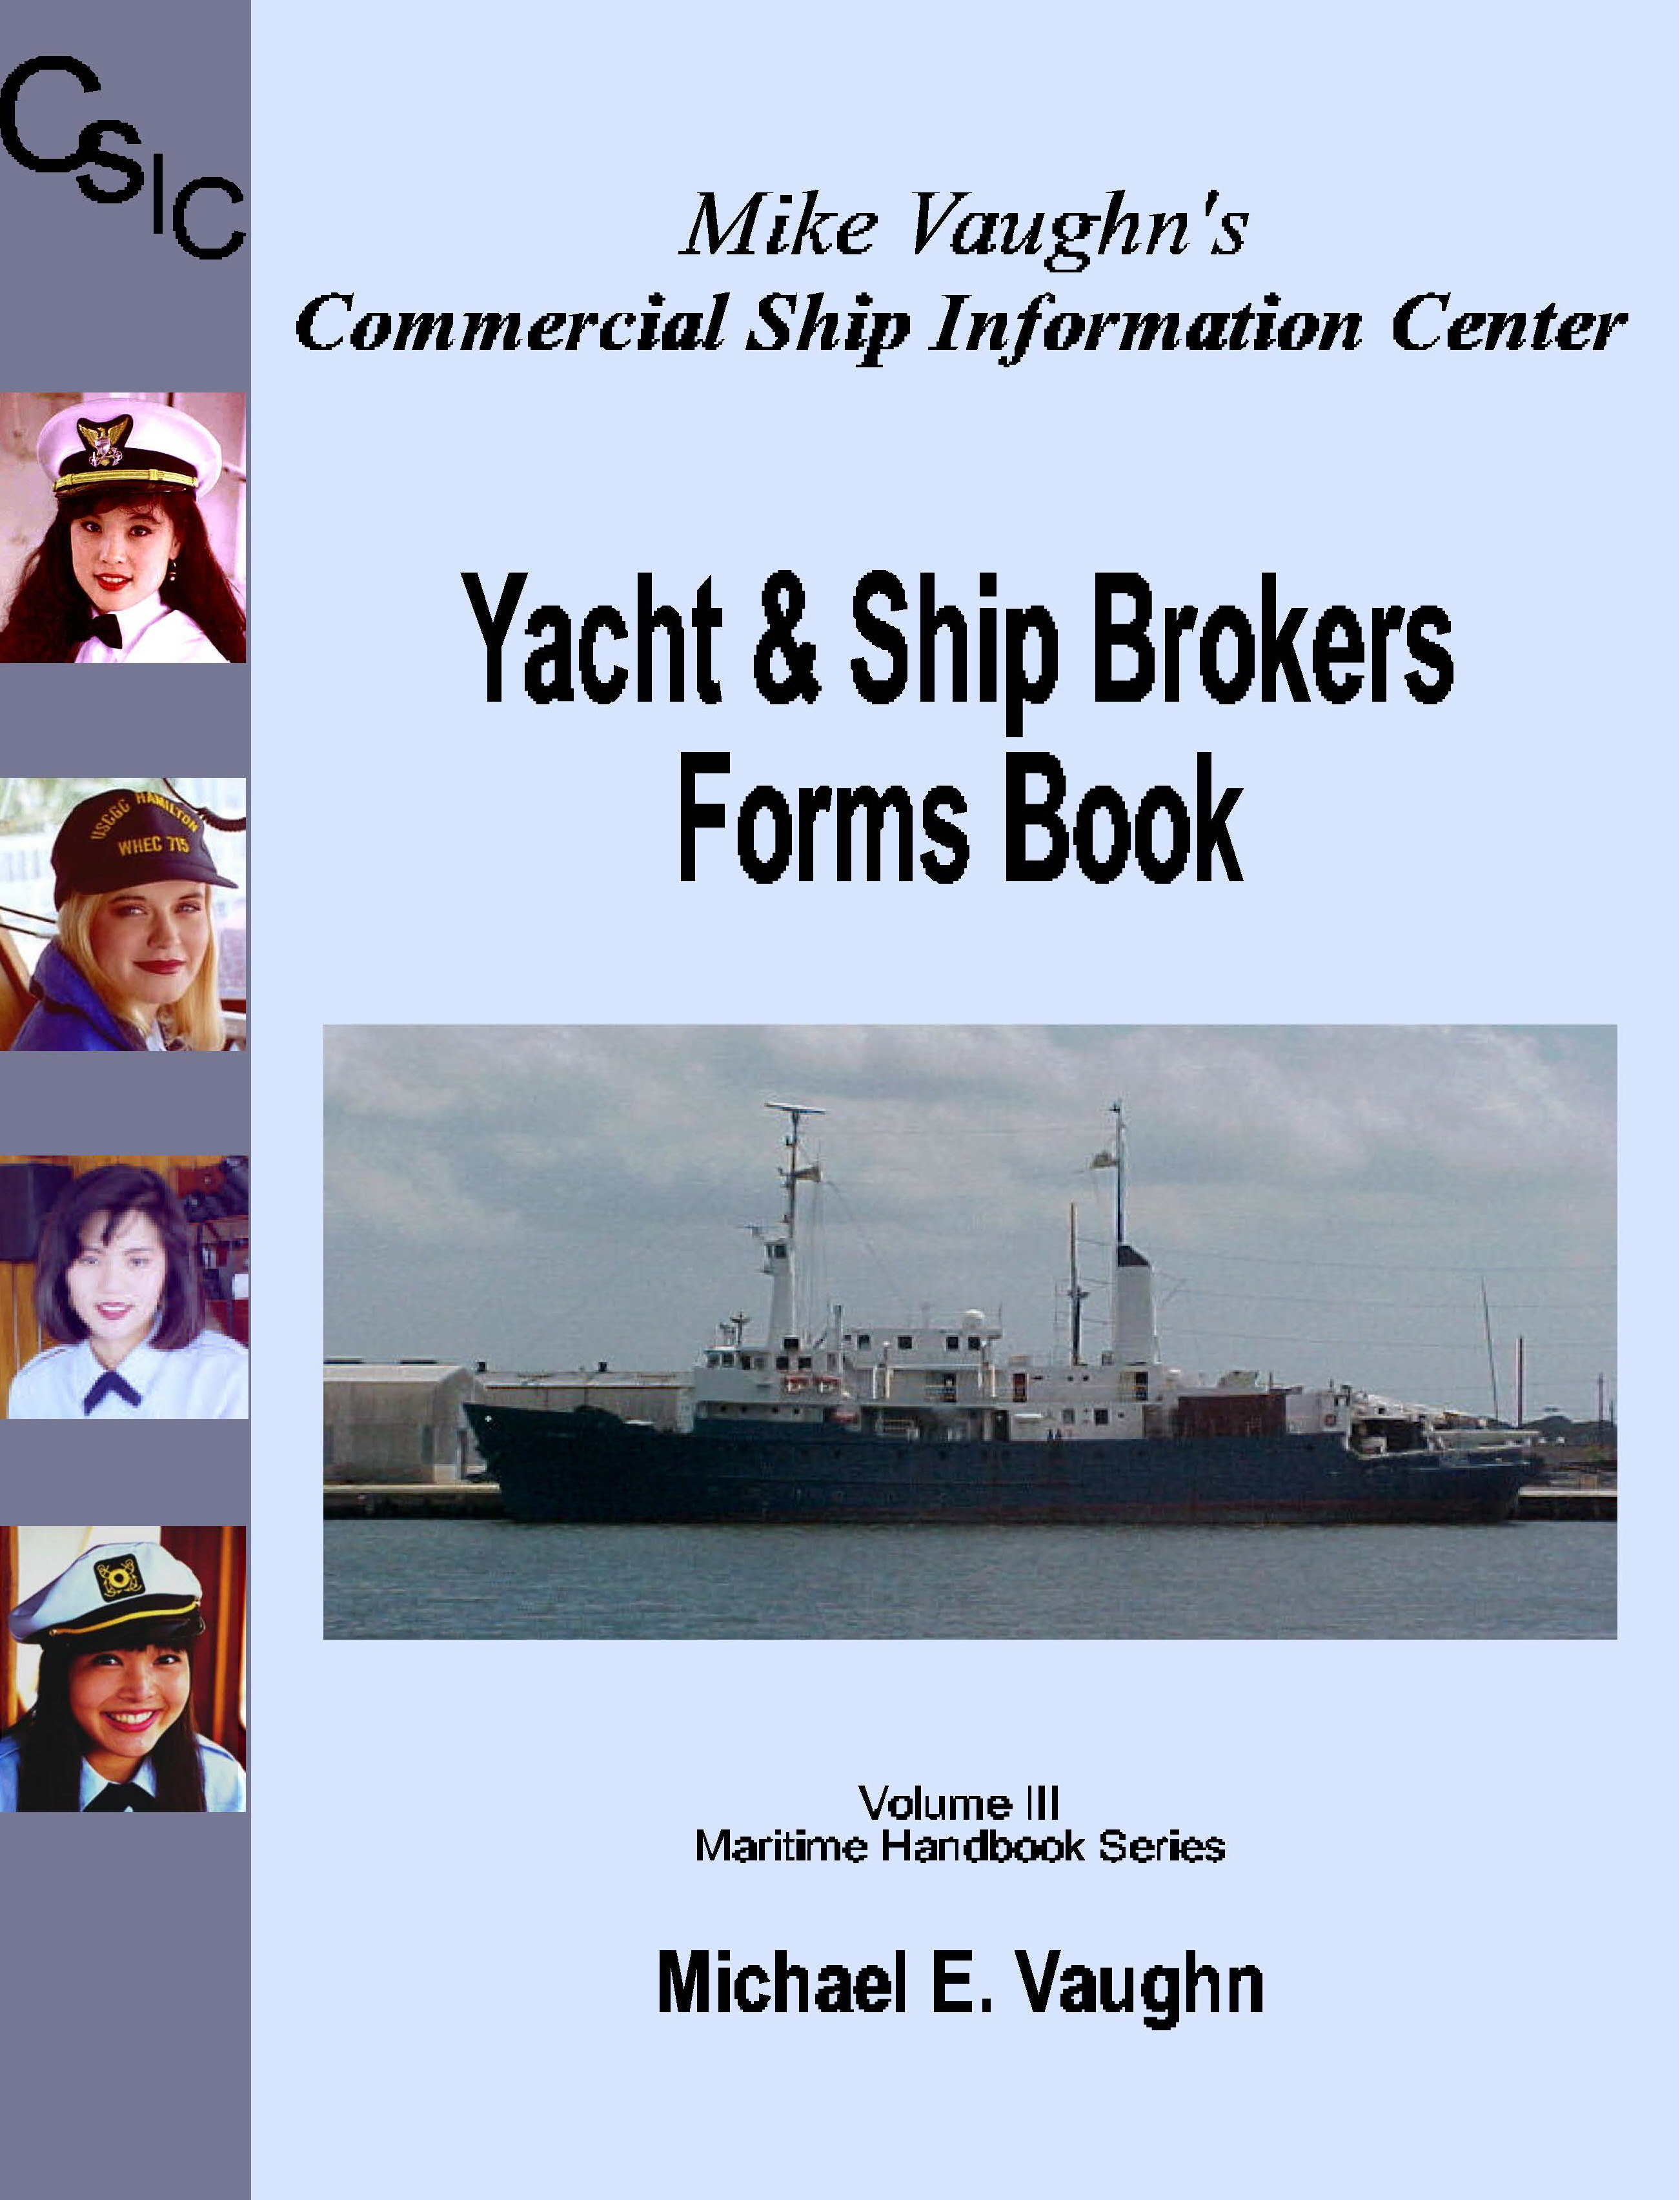 Yacht & Ship Forms Book Cover